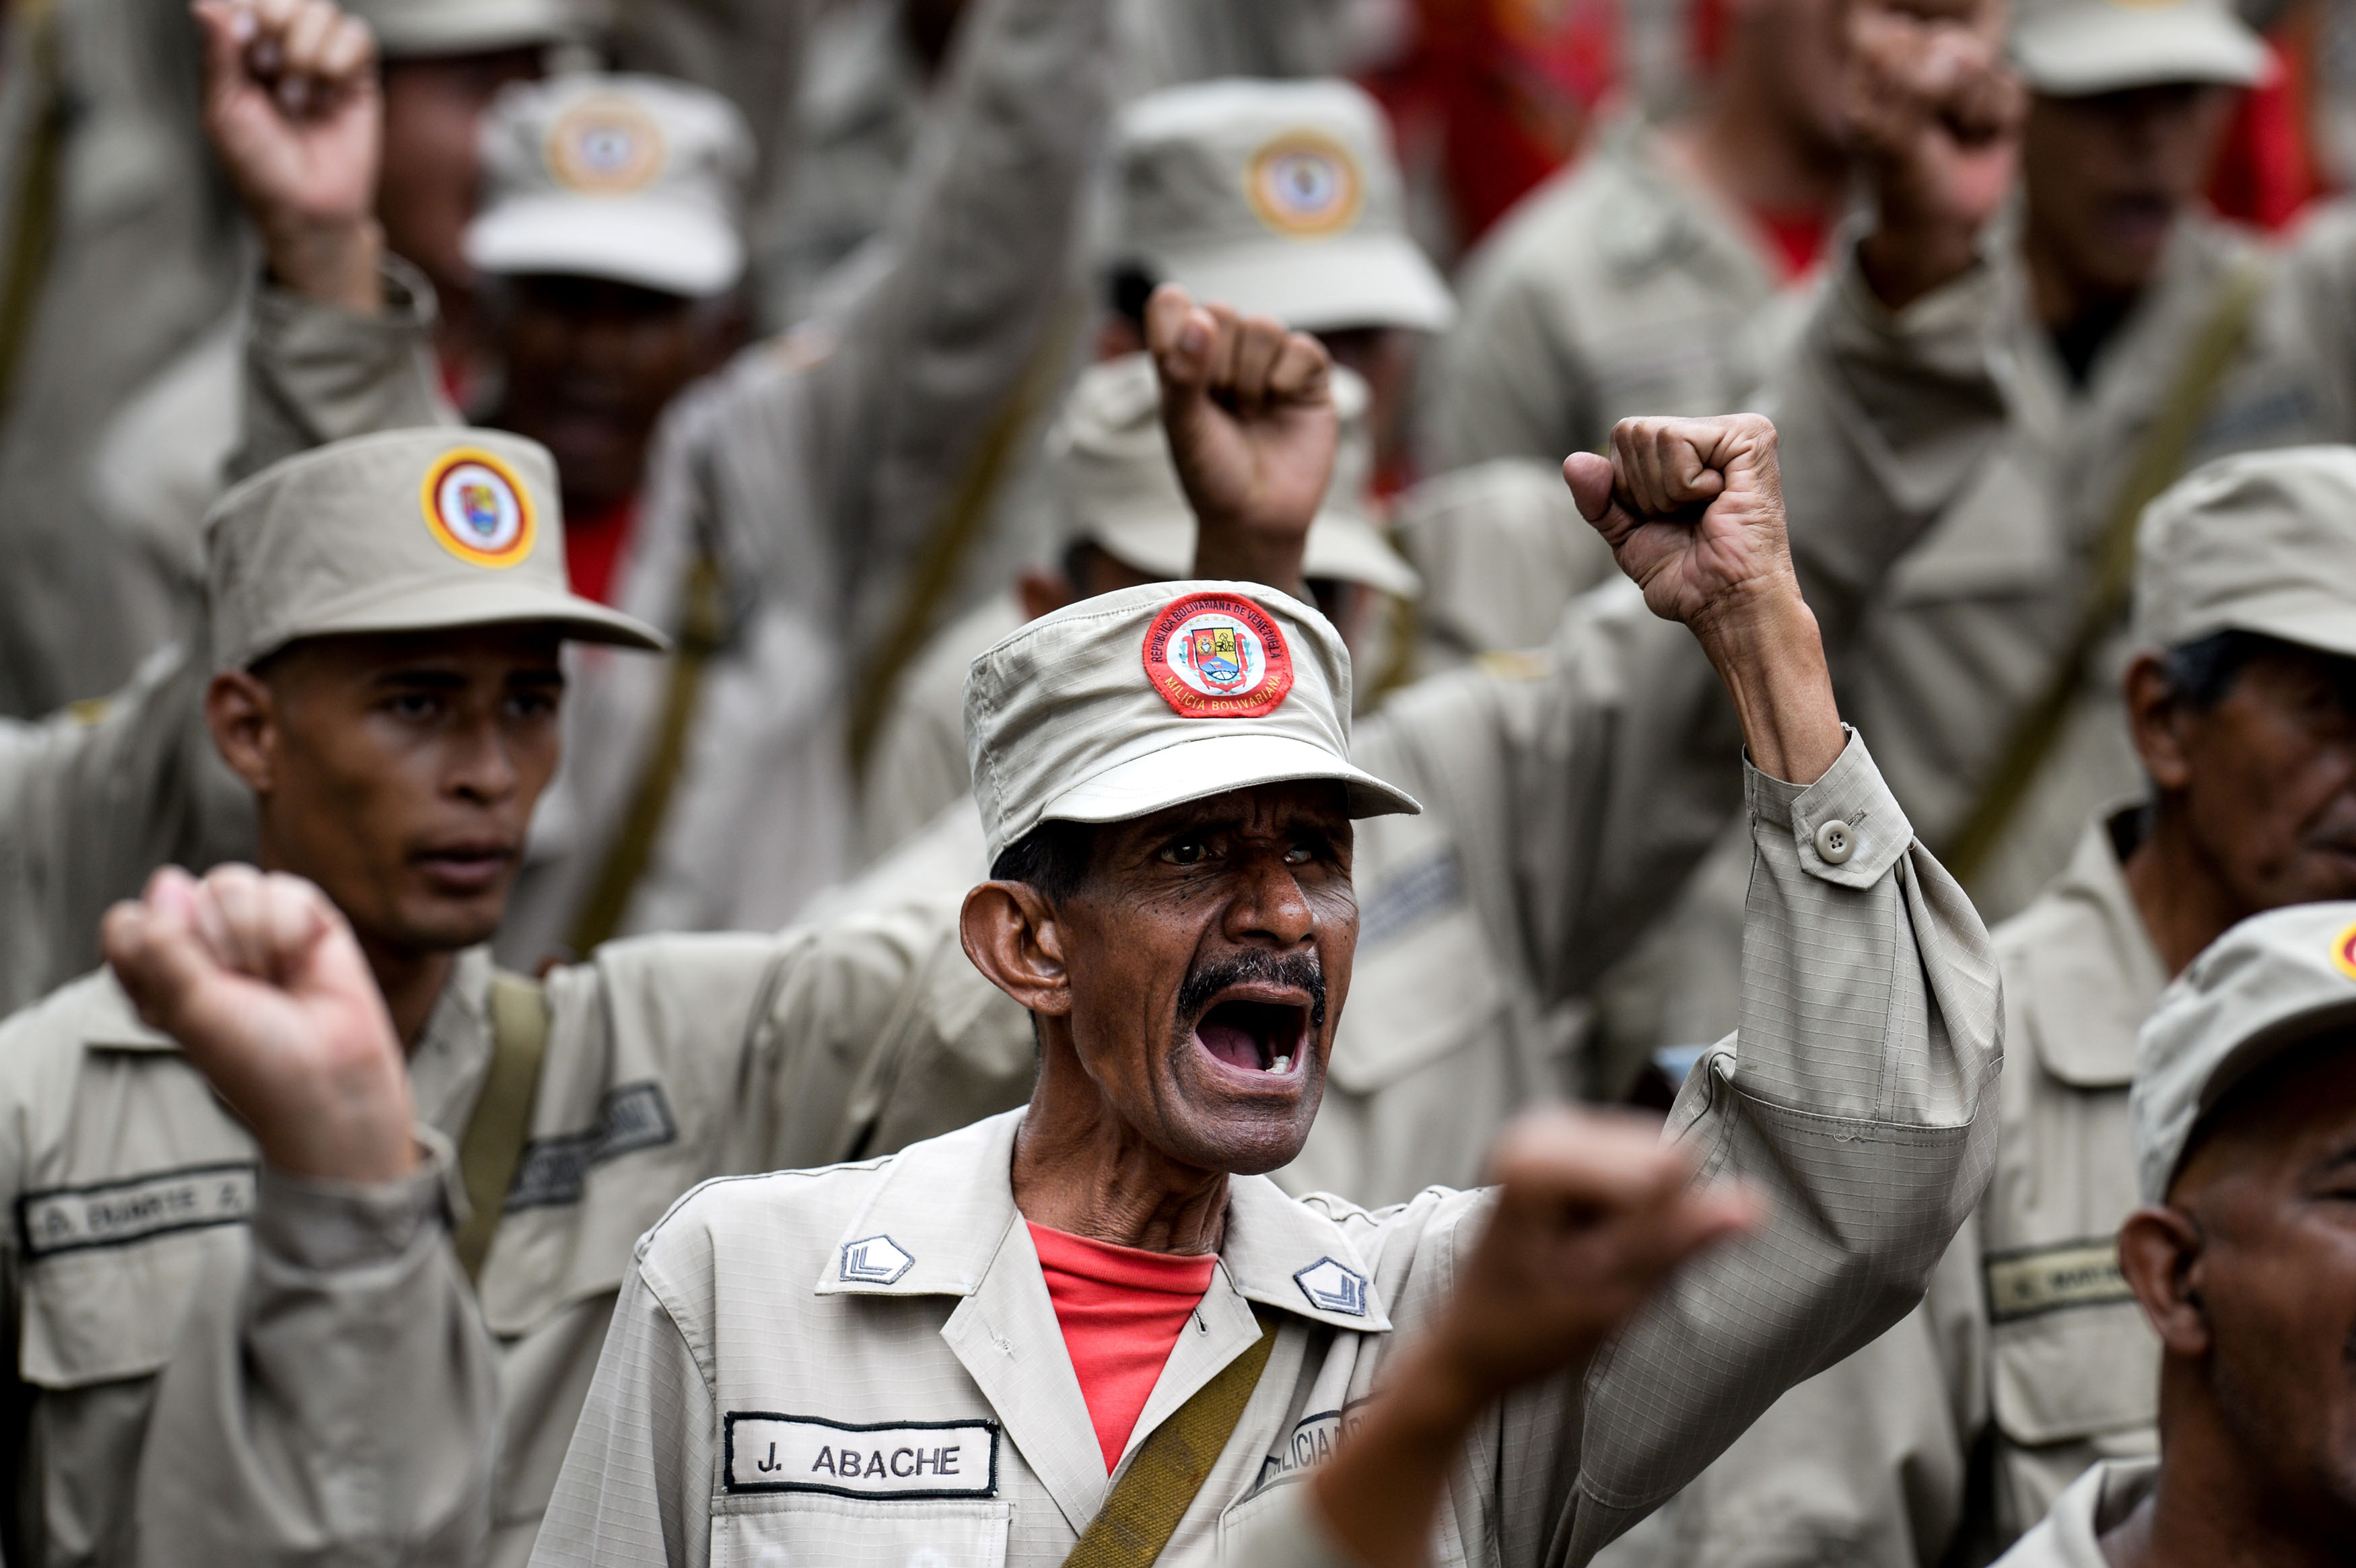 Members of the Bolivarian Militia take part in a parade in the framework of the seventh anniversary of the force, in front of the Miraflores presidential palace in Caracas on April 17, 2017. Venezuela's defence minister on Monday declared the army's loyalty to Maduro, who ordered troops into the streets ahead of a major protest by opponents trying to oust him. Venezuela is bracing for what Maduro's opponents vow will be the "mother of all protests" Wednesday, after two weeks of violent demos against moves by the leftist leader and his allies to tighten their grip on power. / AFP PHOTO / Federico PARRA